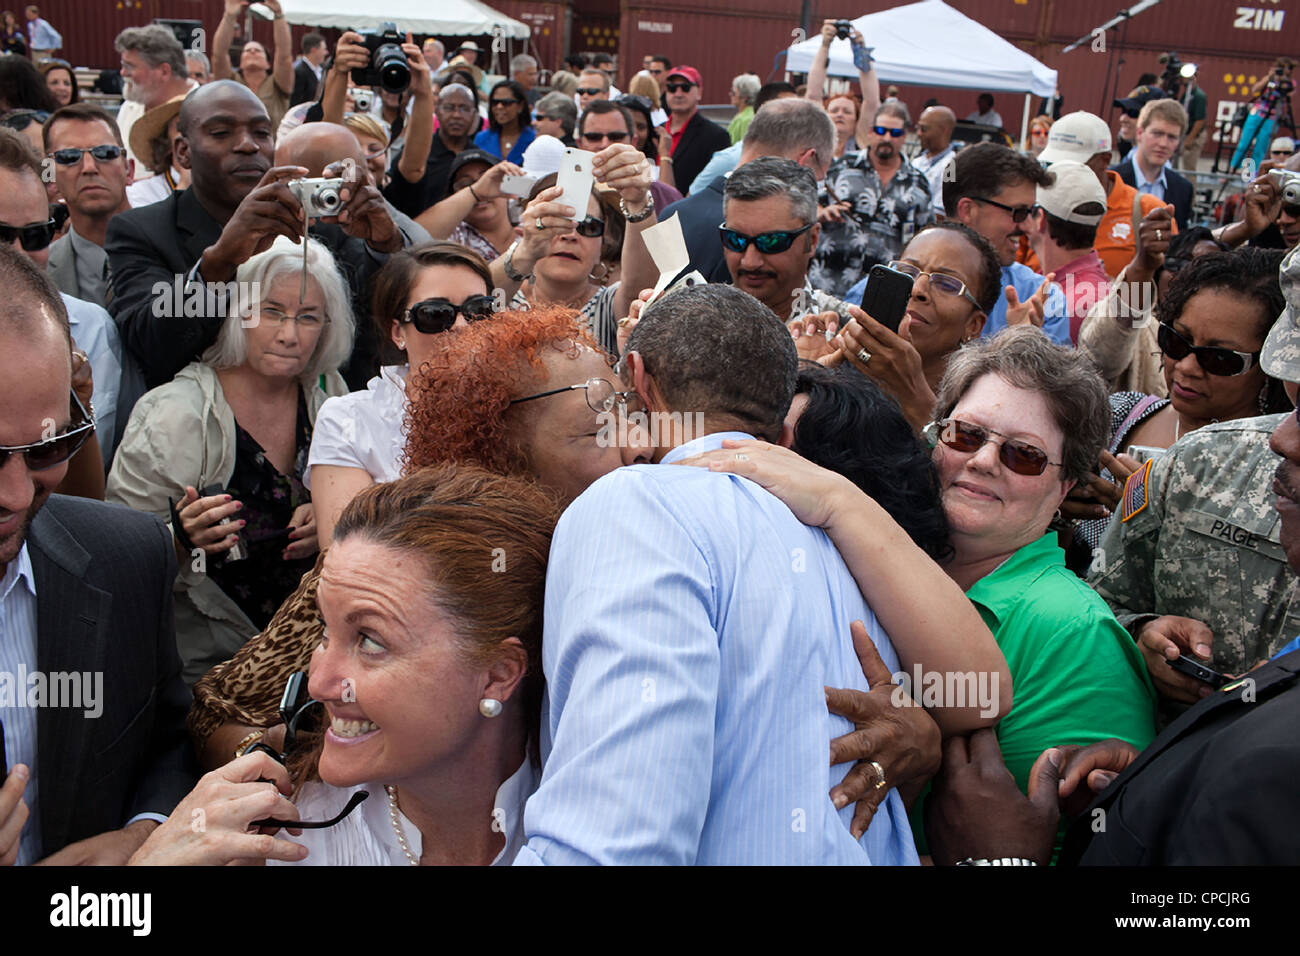 US President Barack Obama is embraced by supporters after speaking at the Port of Tampa April 13, 2012 in Tampa, Florida. Stock Photo